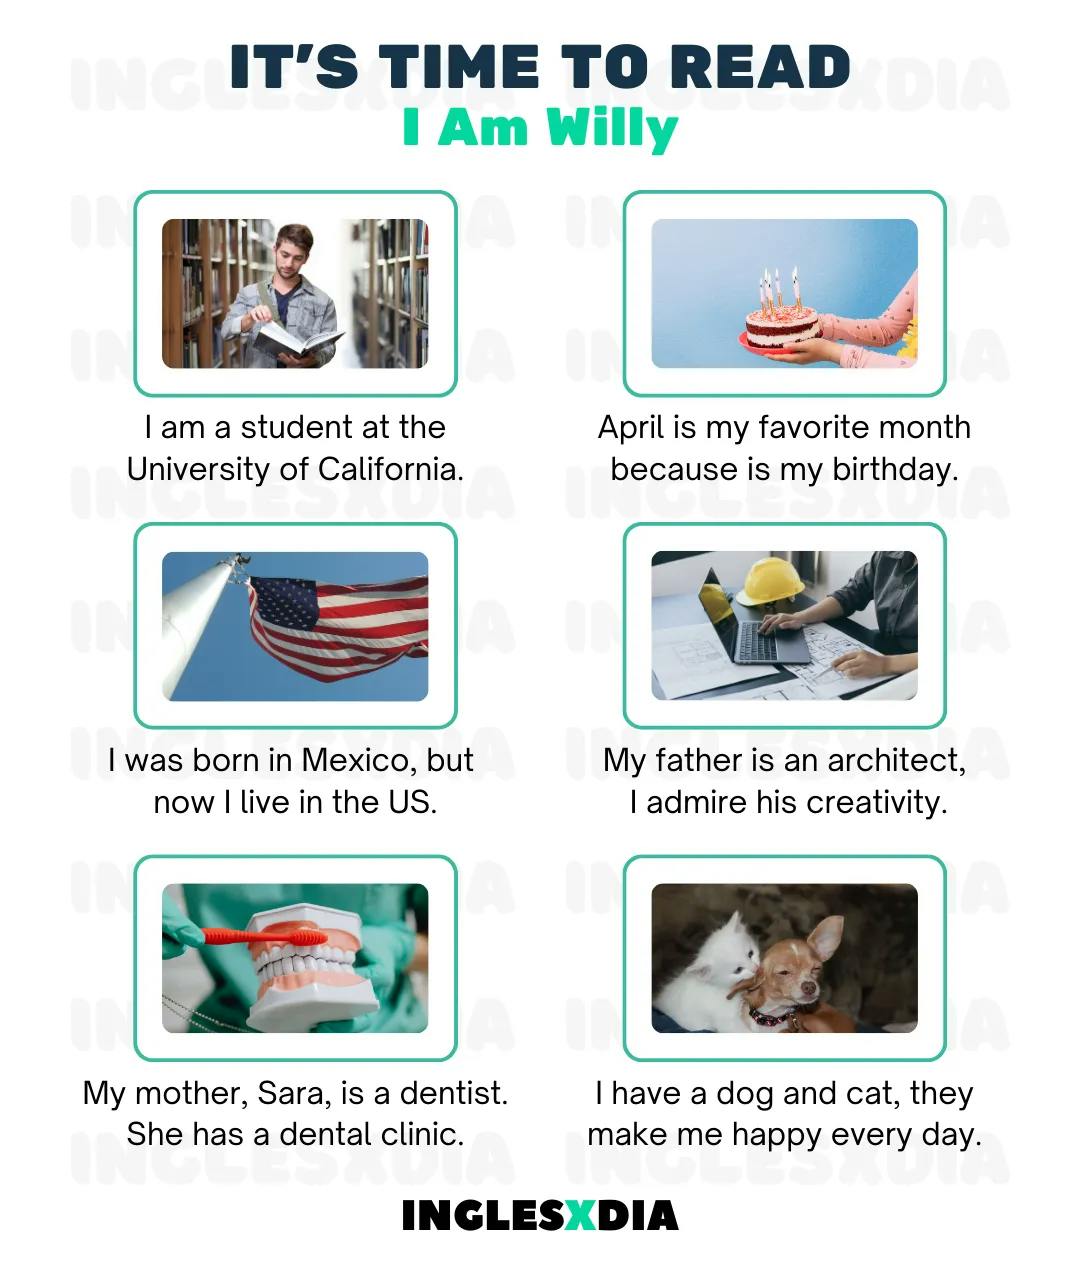 I Am Willy